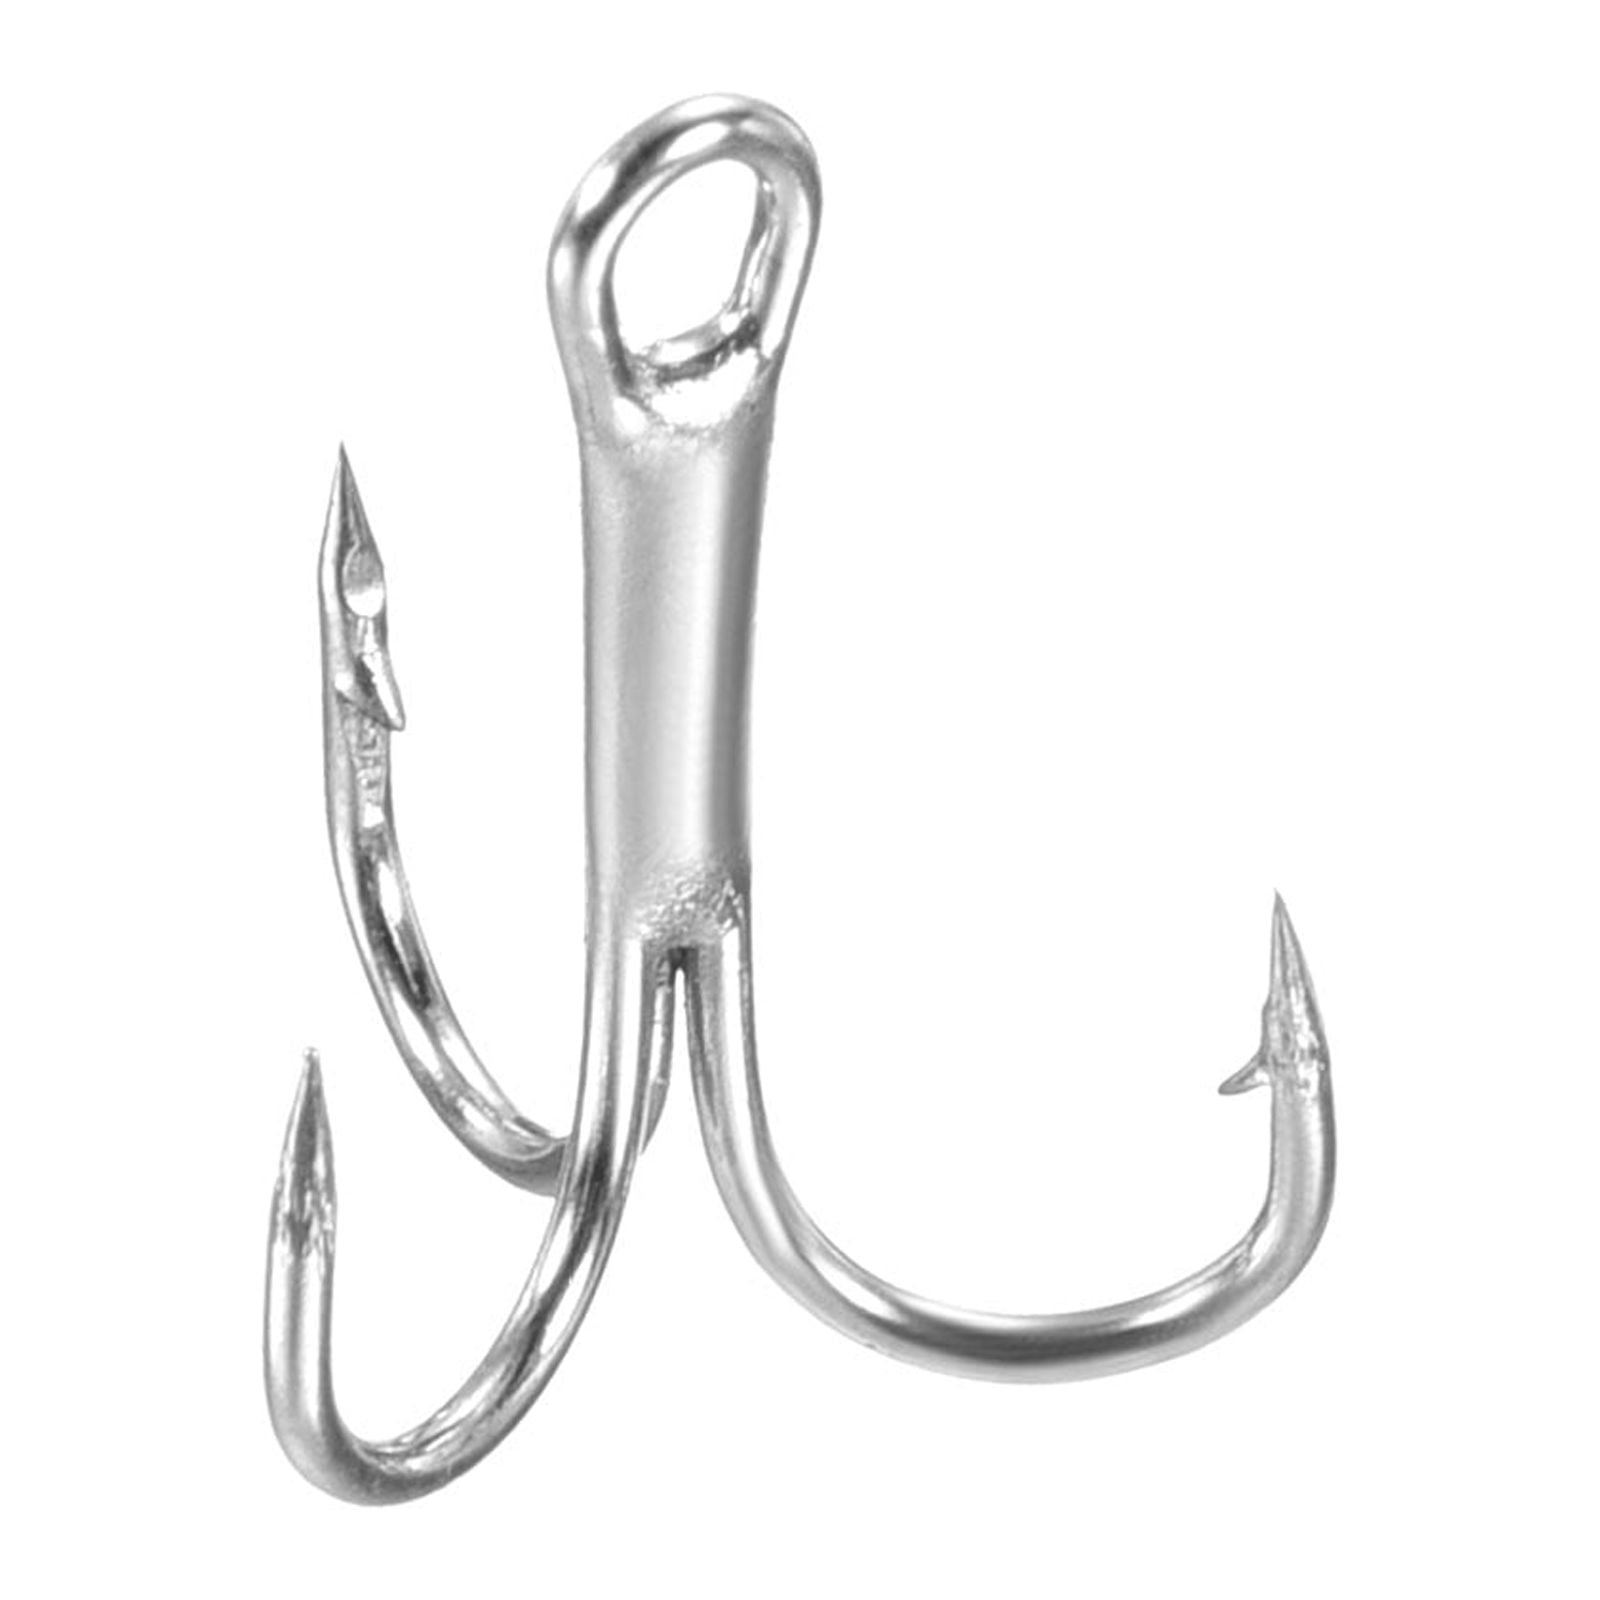 BKK Treble Fishing Hooks High Carbon Steel 4X Strong Short Shank For  Freshwater And Saltwater Tools 231225 From Fan05, $12.07